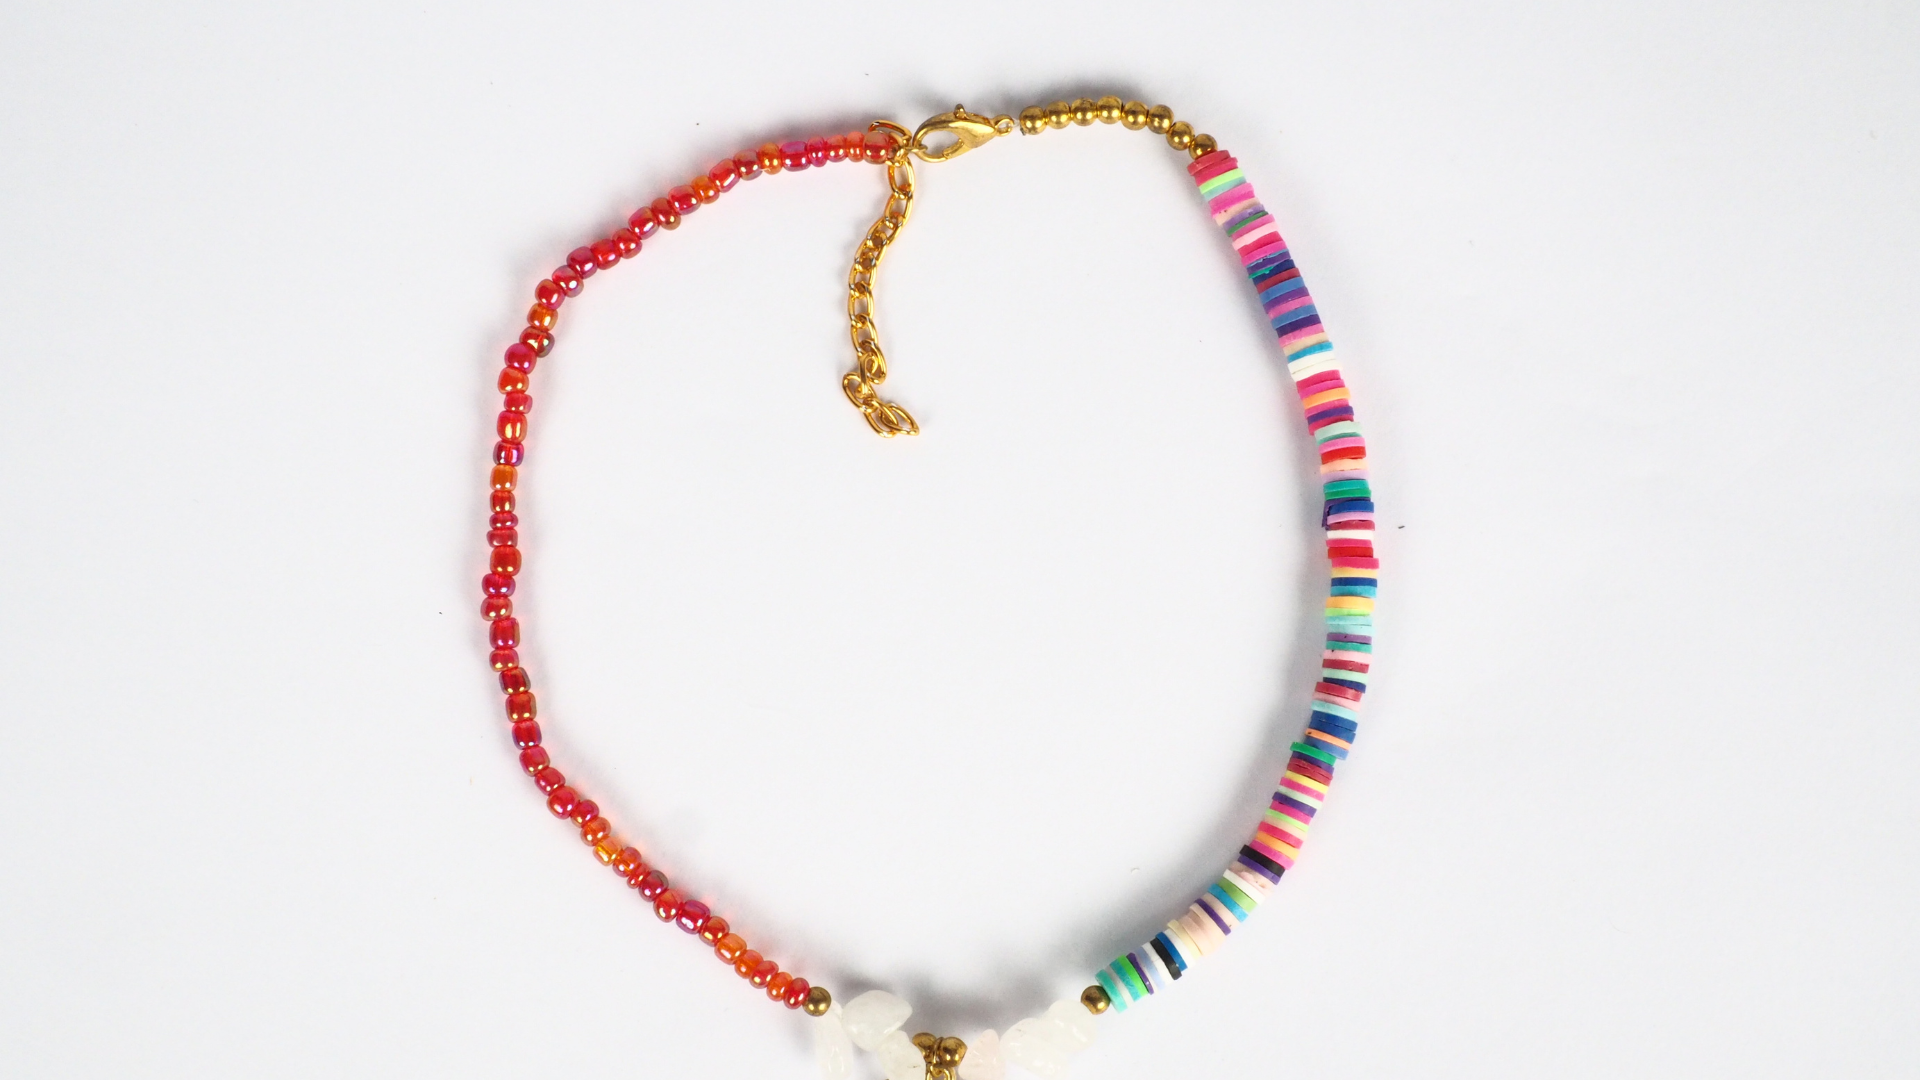 https://www.budivis.com/image/cache/catalog/A%20Blog/A%20blog%20pic/new/Beaded%20Necklace-1920x1080.png